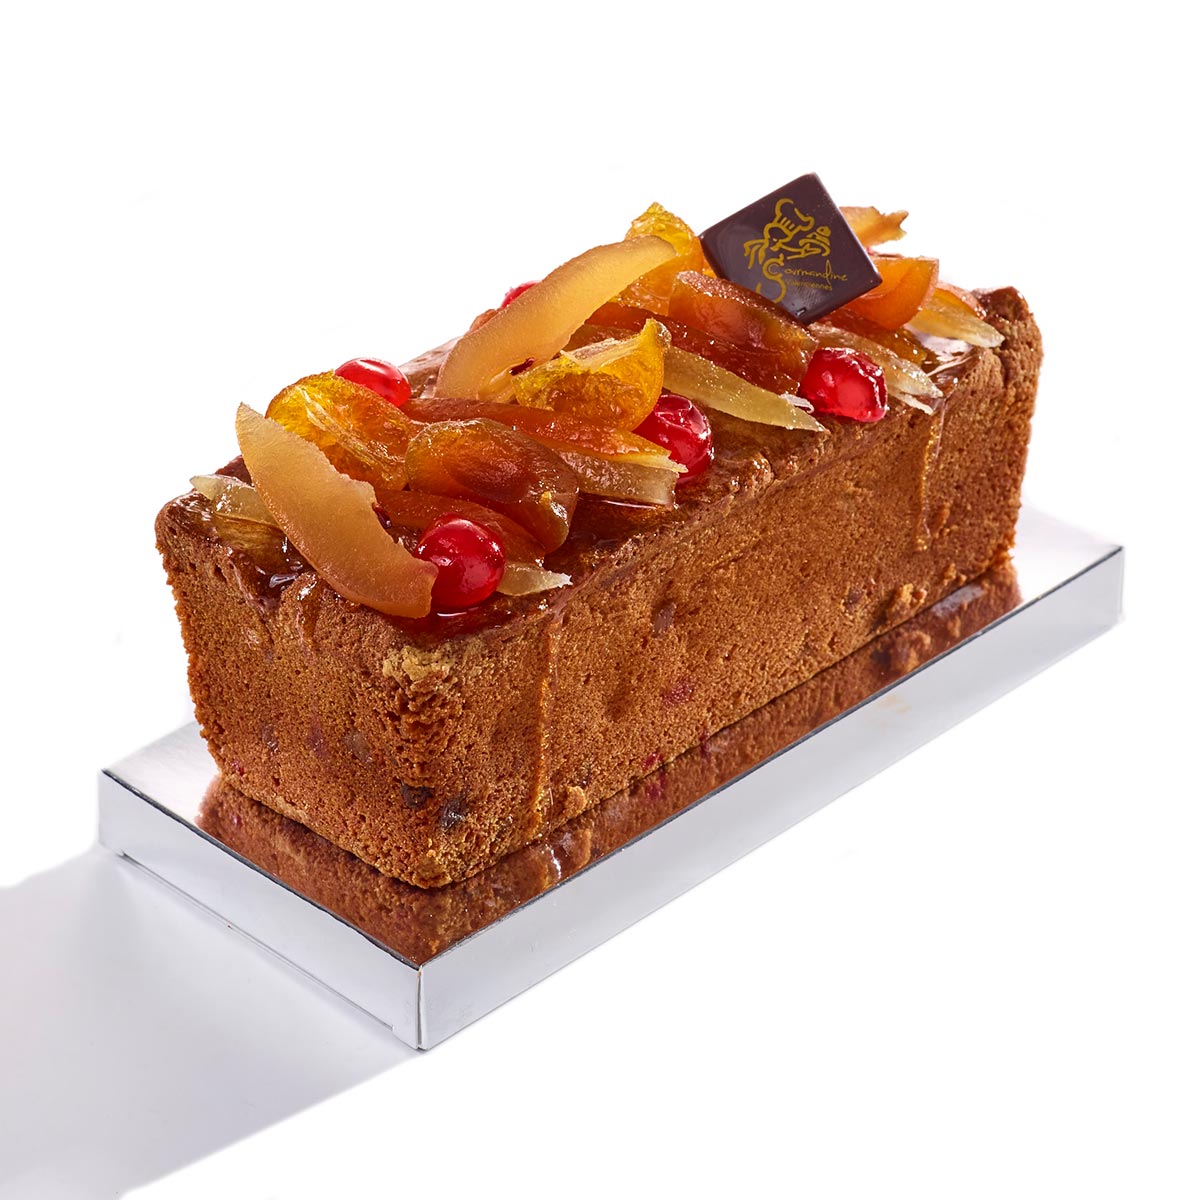 Cake fruits confits - biscuiterie-confiserie